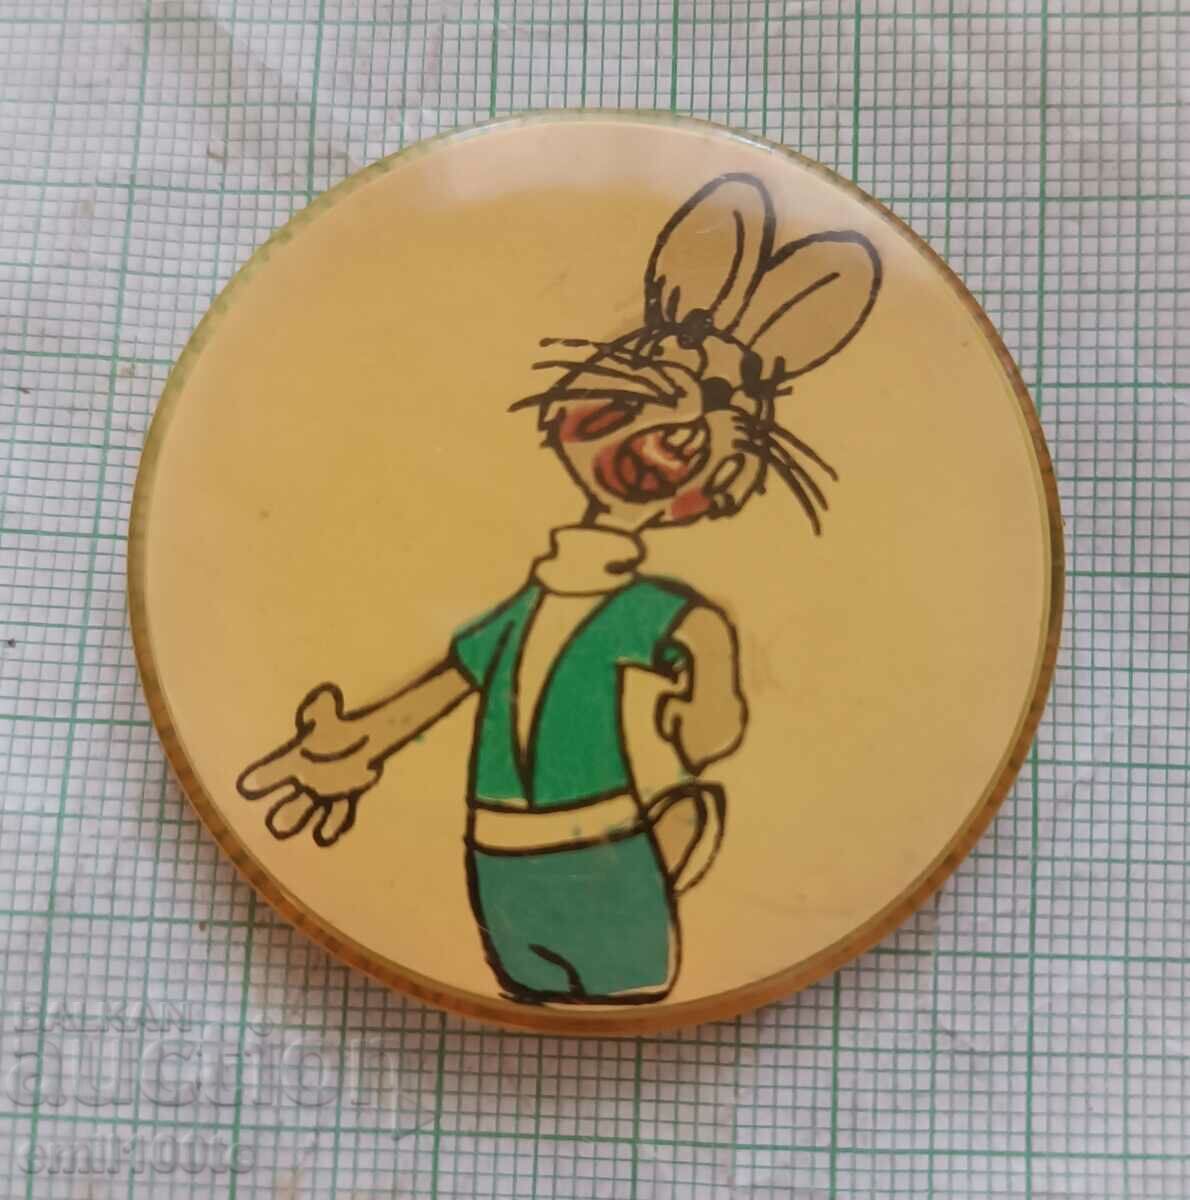 Badge - Well guessed Rabbit